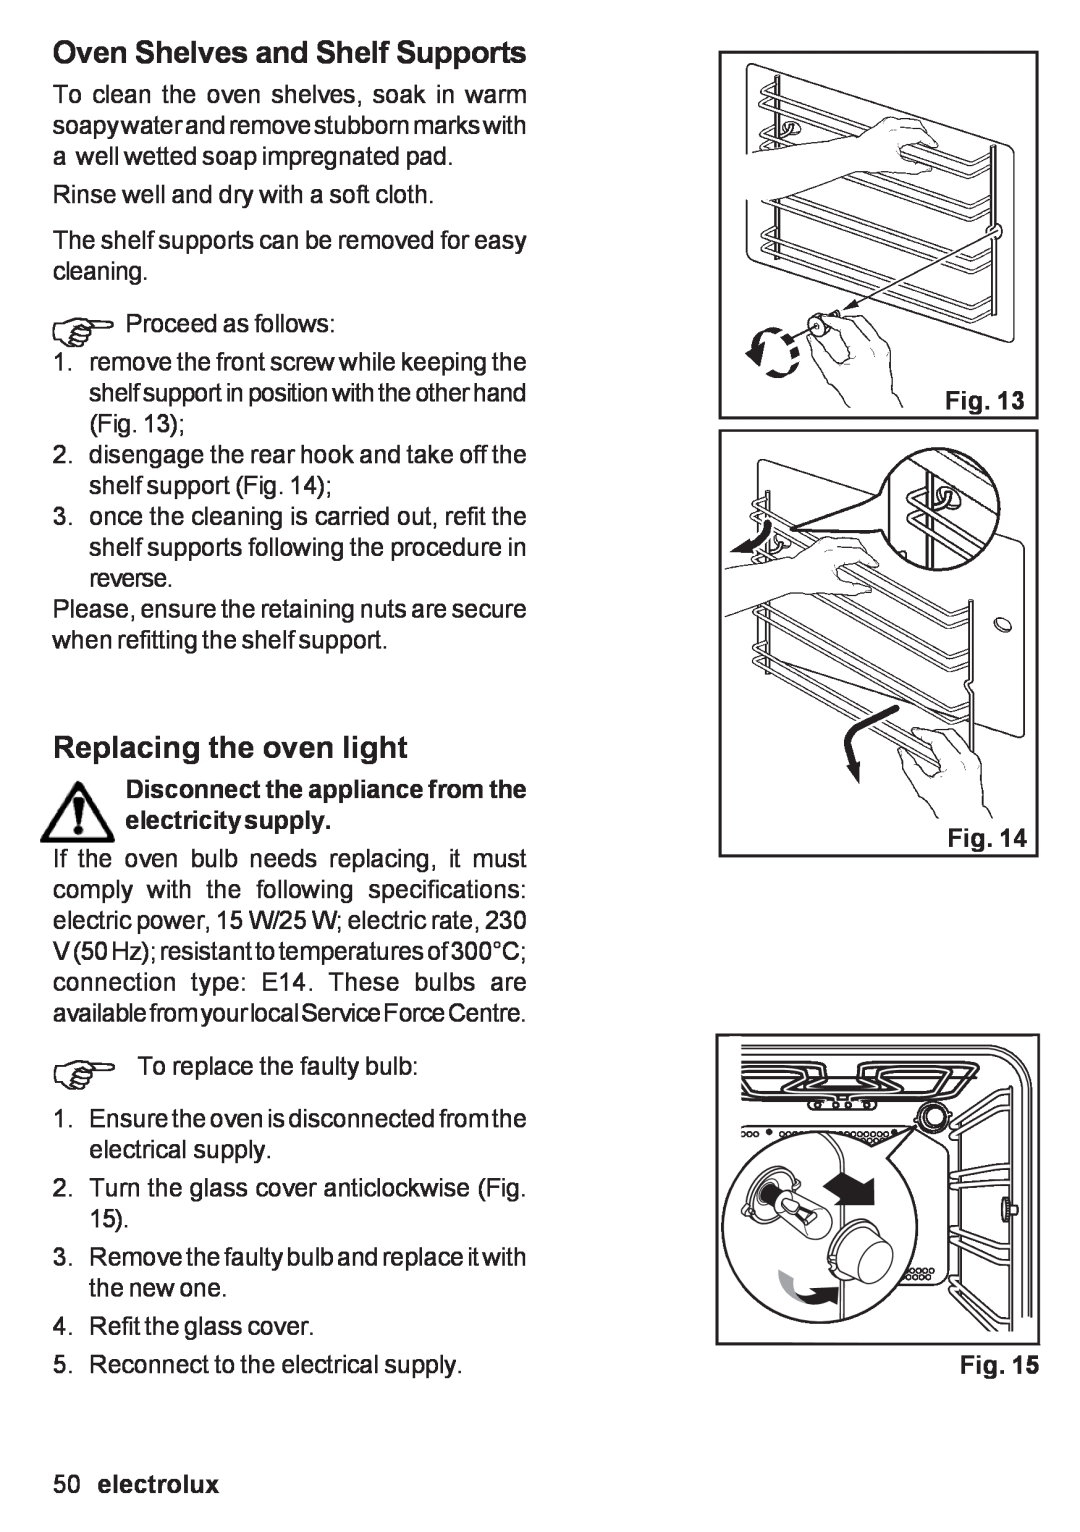 Electrolux EOB 53003 user manual Oven Shelves and Shelf Supports, Replacing the oven light, electrolux 